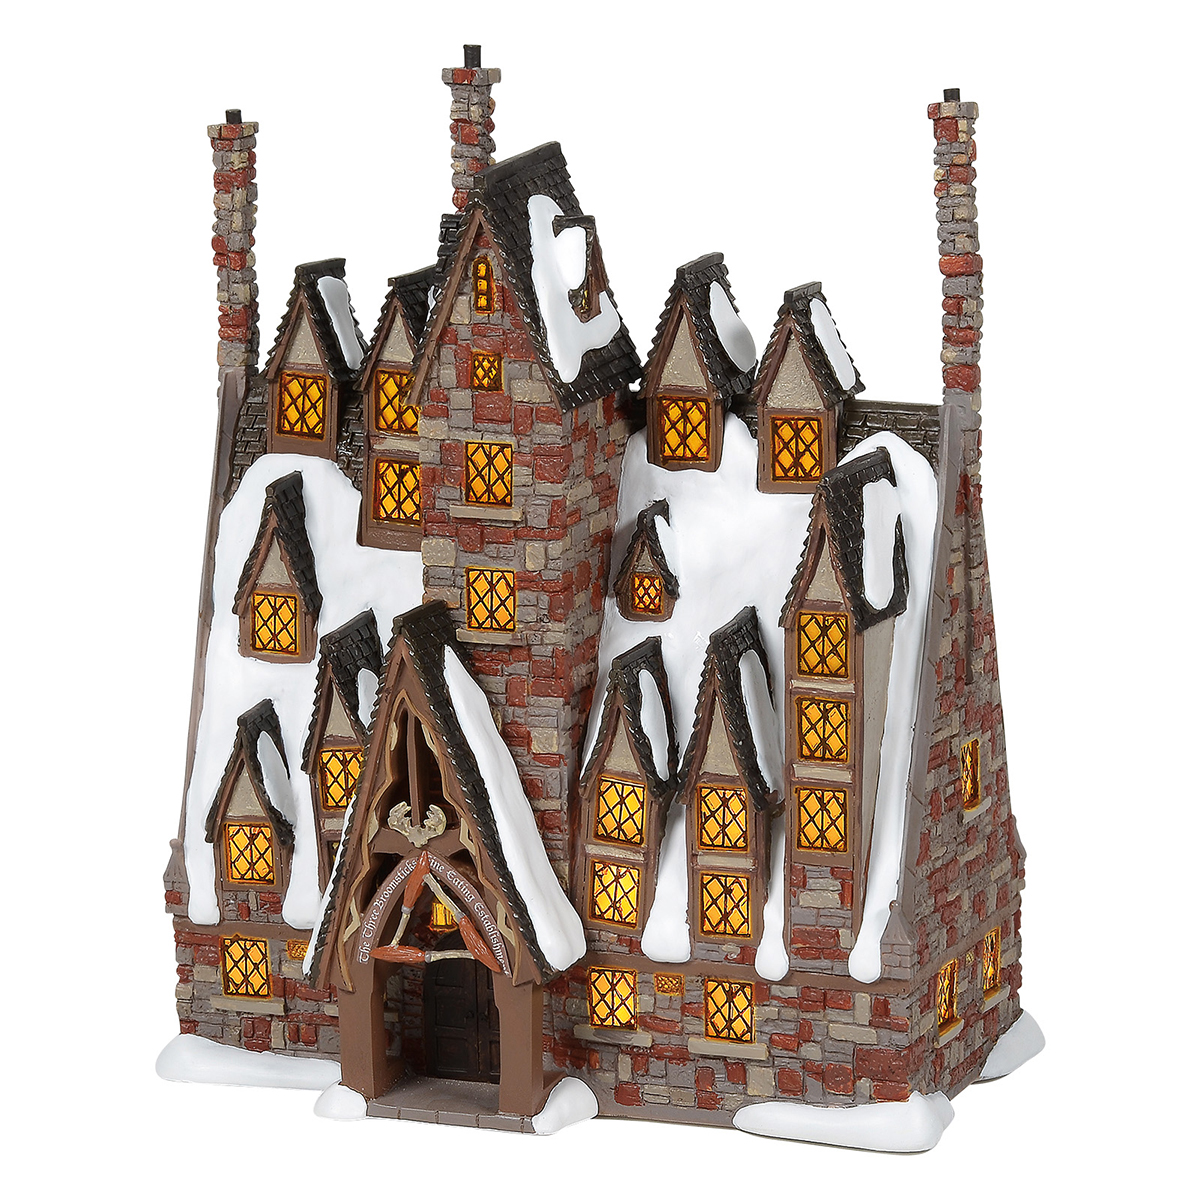 Three Broomsticks by Department 56 by Rich Mar Florist